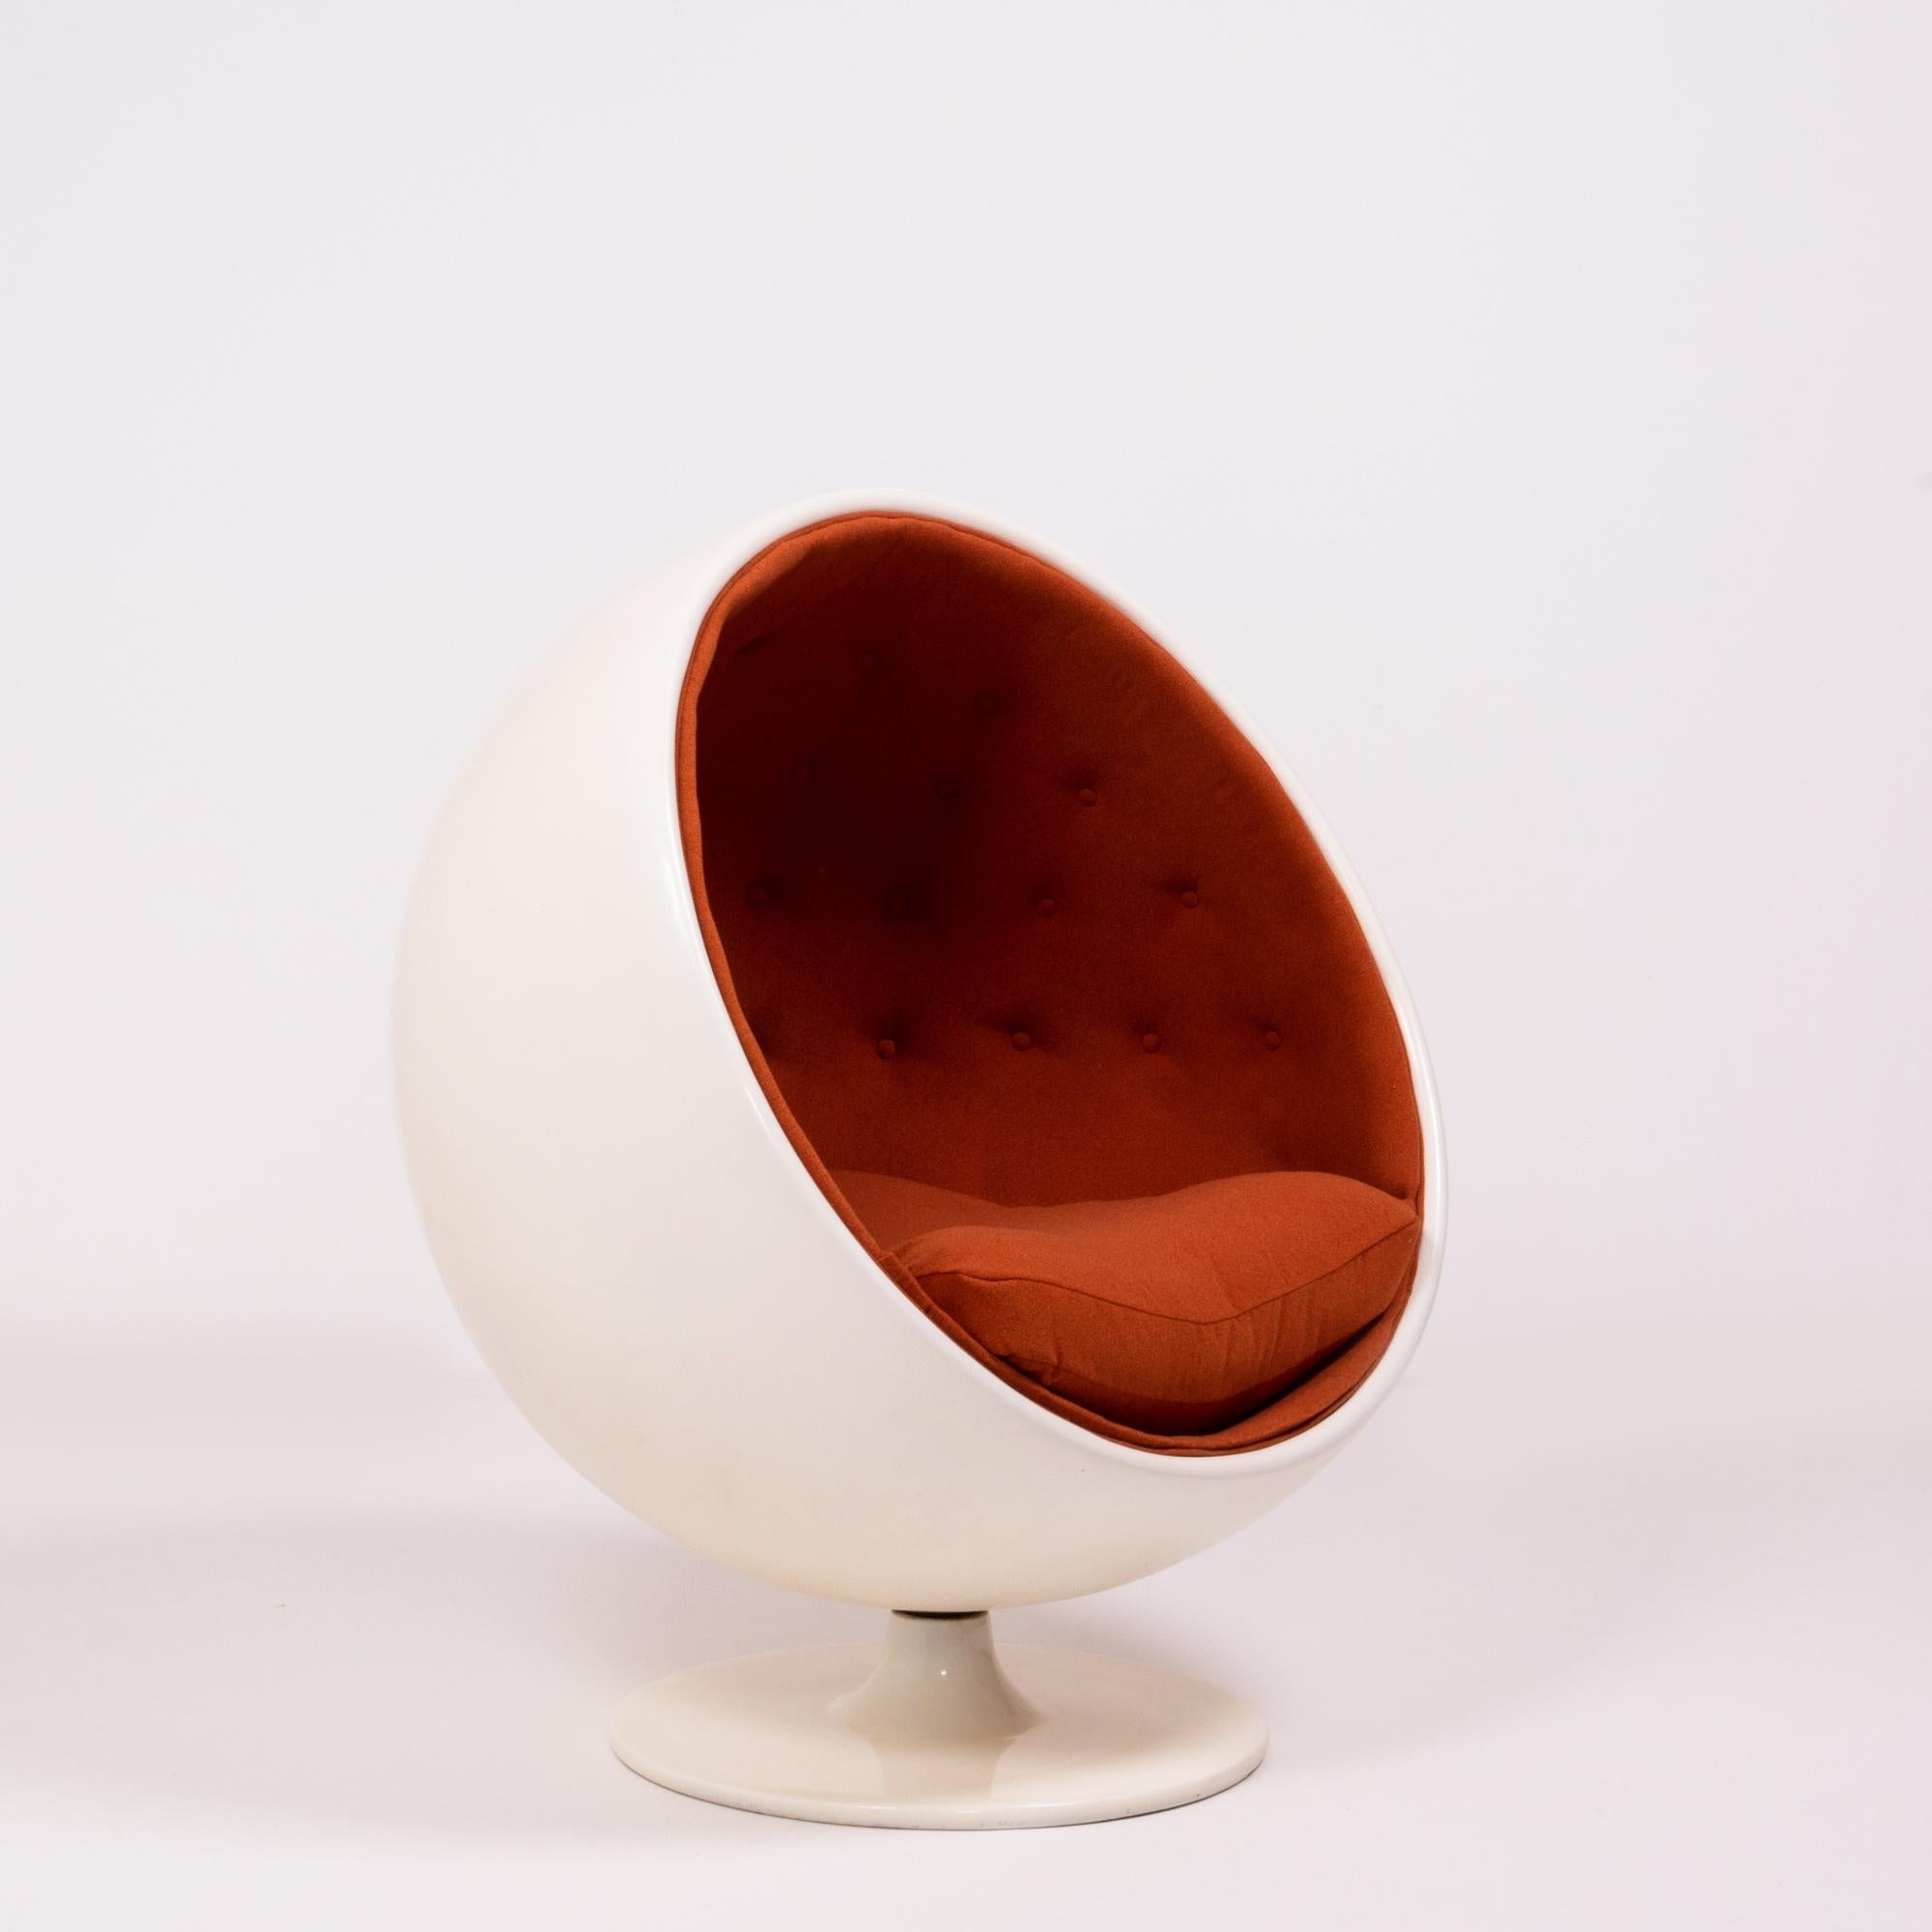 Originally designed by Eero Aarnio in 1963, the Ball Chair made its debut at the Cologne Furniture Fair in 1966 and has since become a piece of design history.

Constructed in white fiberglass, after the model by Eero Aarnio, the ball chair has a